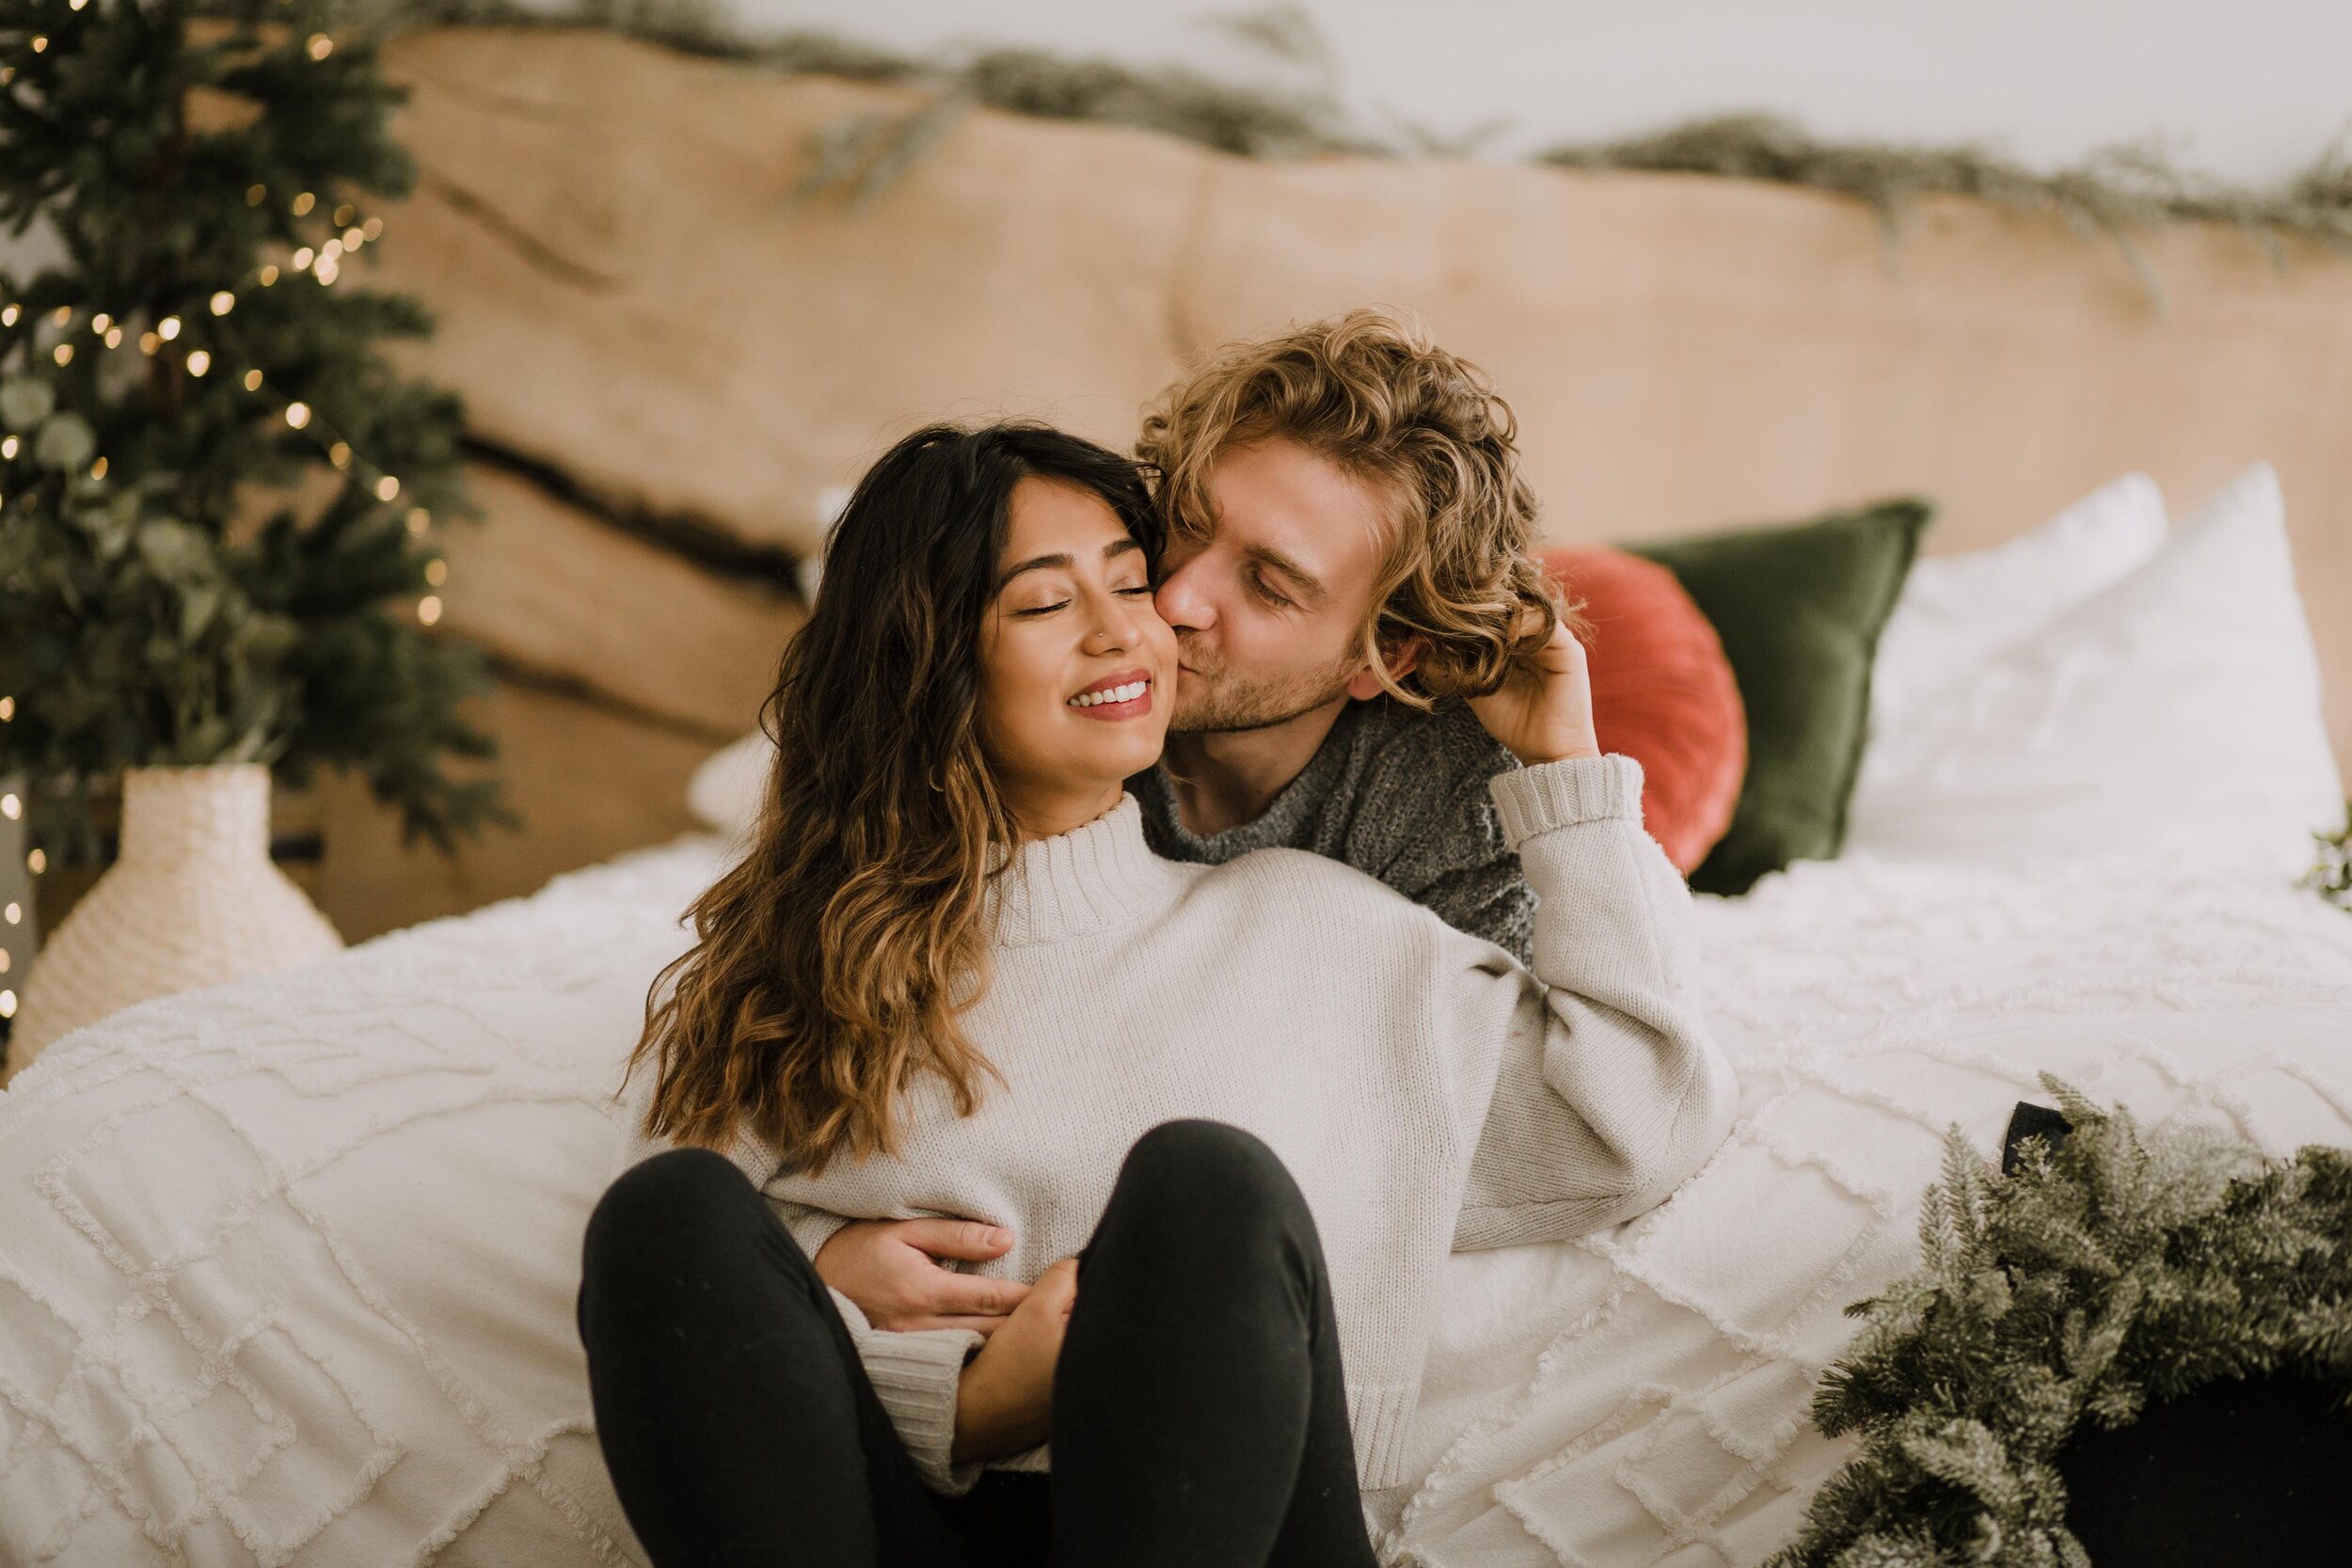 GH Photography Intimate Festive Holiday Couples Session-11.jpg